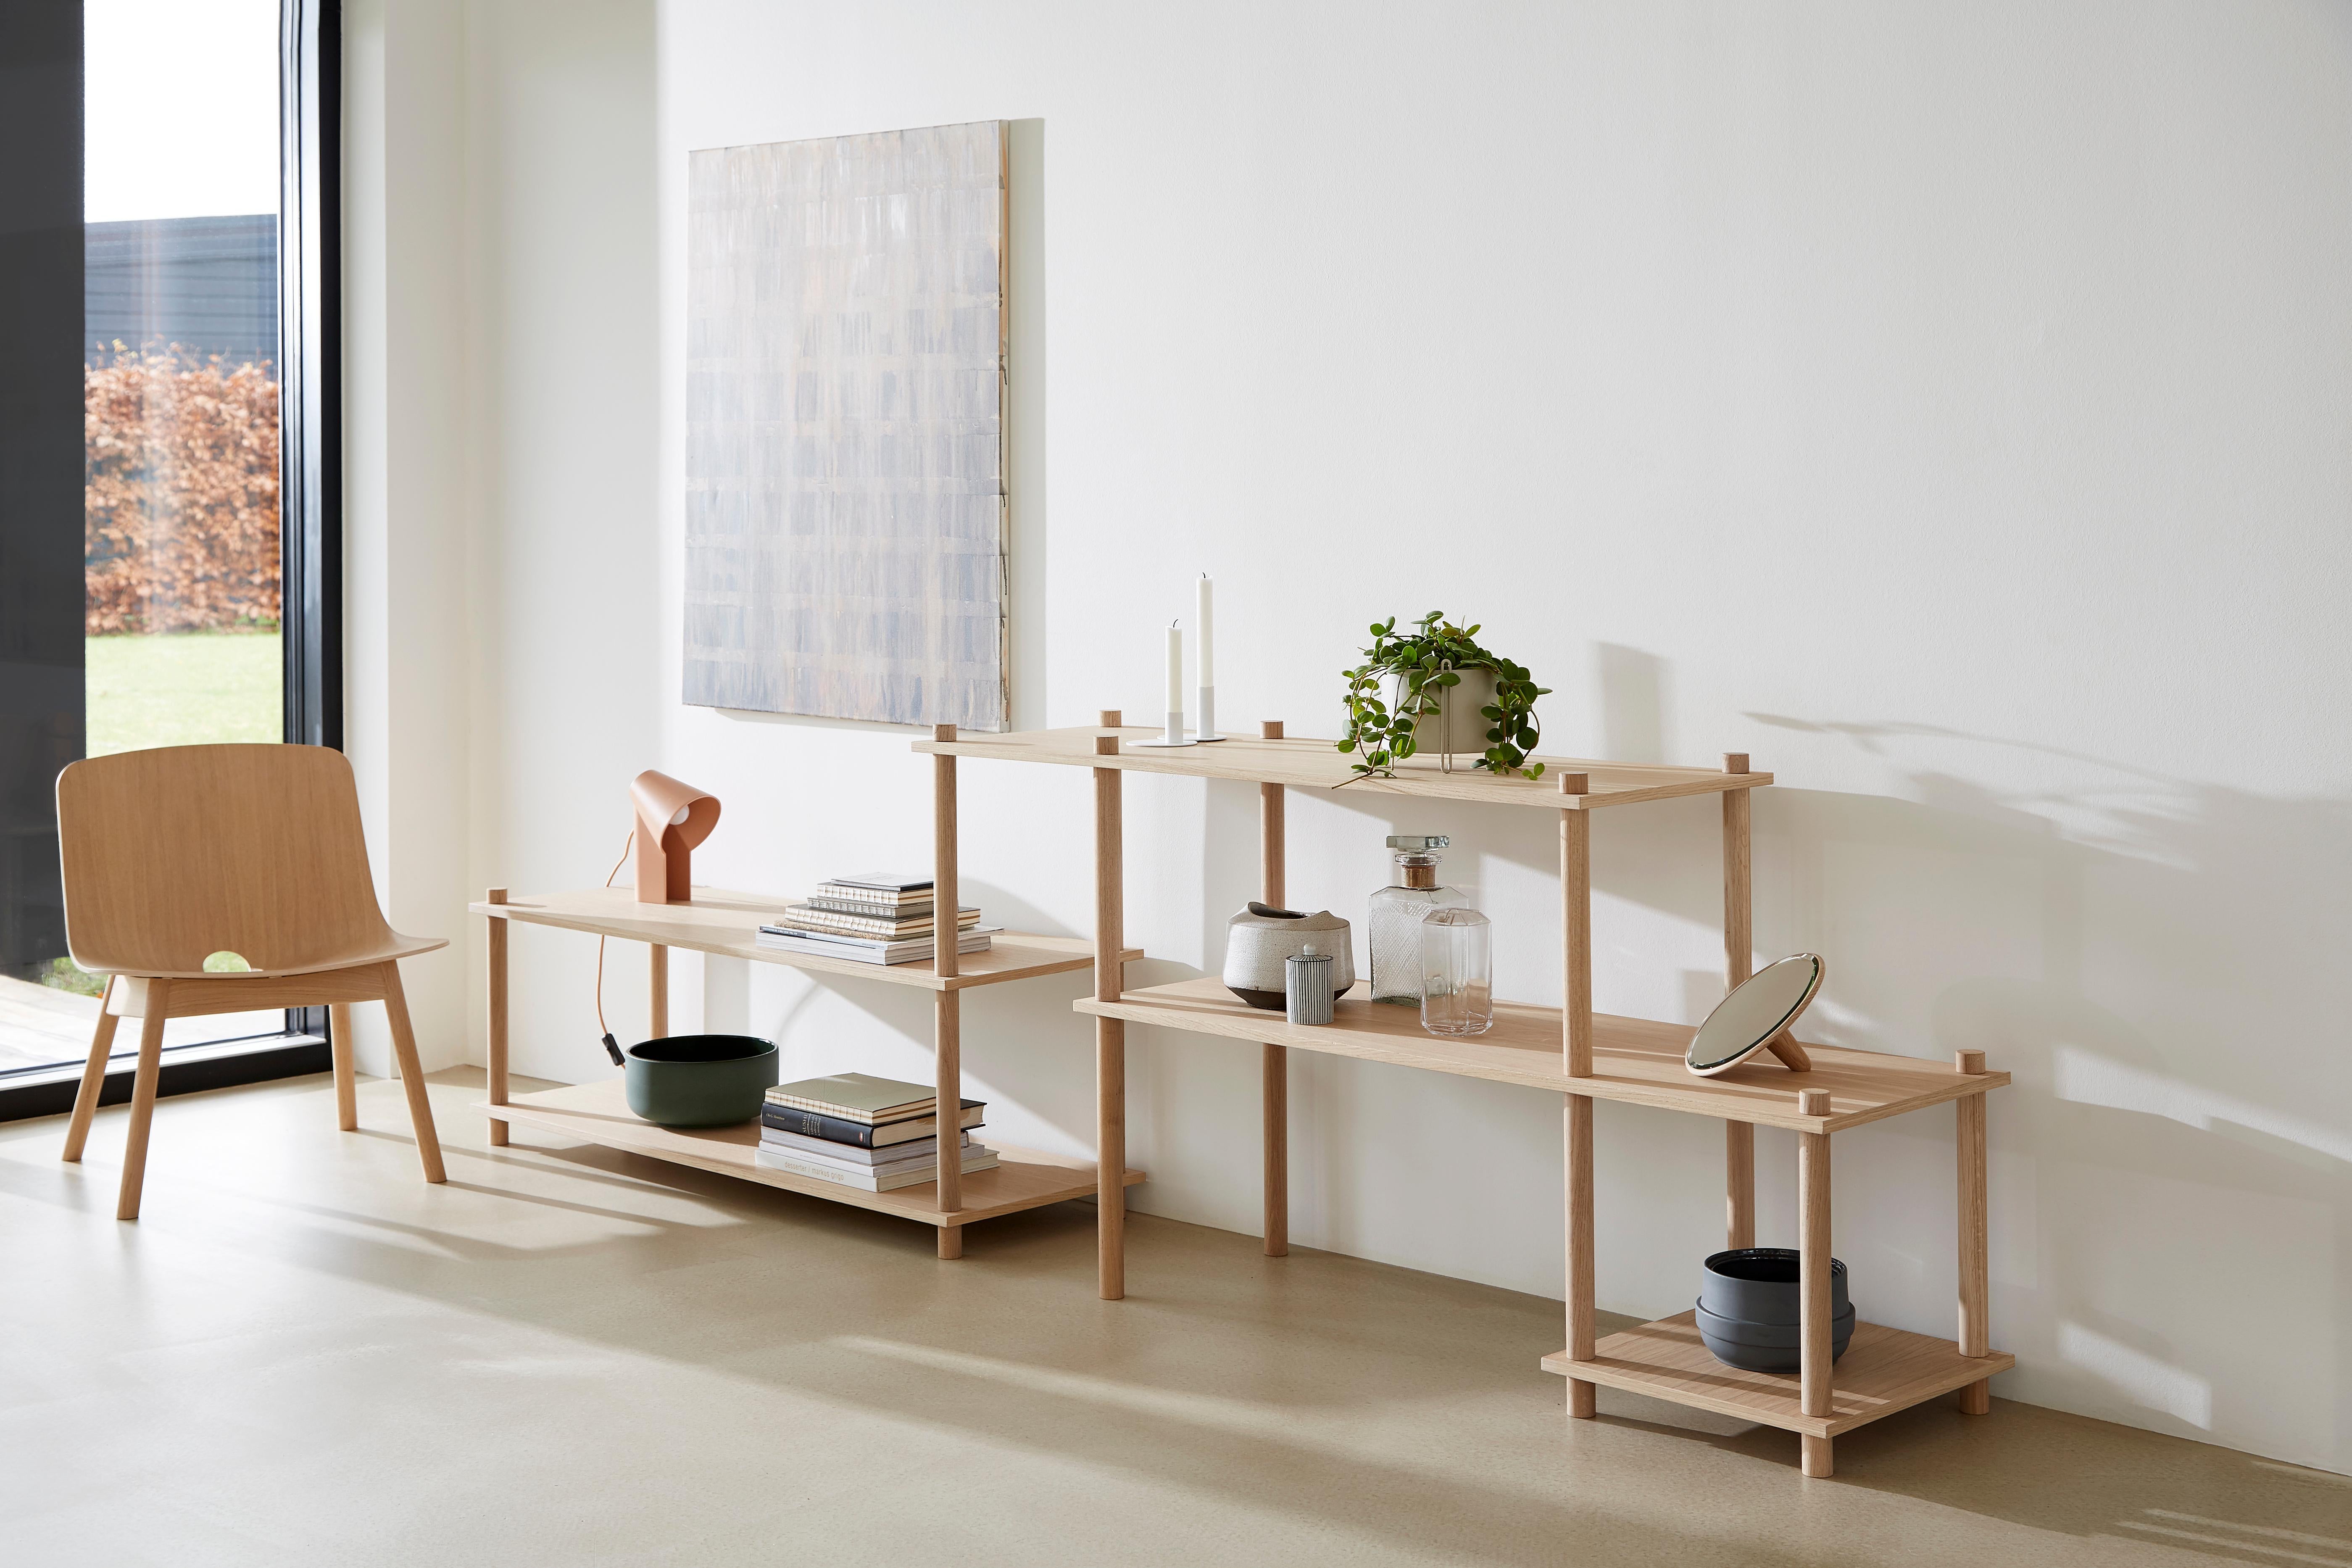 Oak elevate shelving VIII by Camilla Akersveen and Christopher Konings.
Materials: Metal, oak.
Dimensions: D 40 x W 233.2 x H 78.7 cm.
Available in matt lacquered oak or black oak. Different shelving sistems available.

Camilla Akersveen and